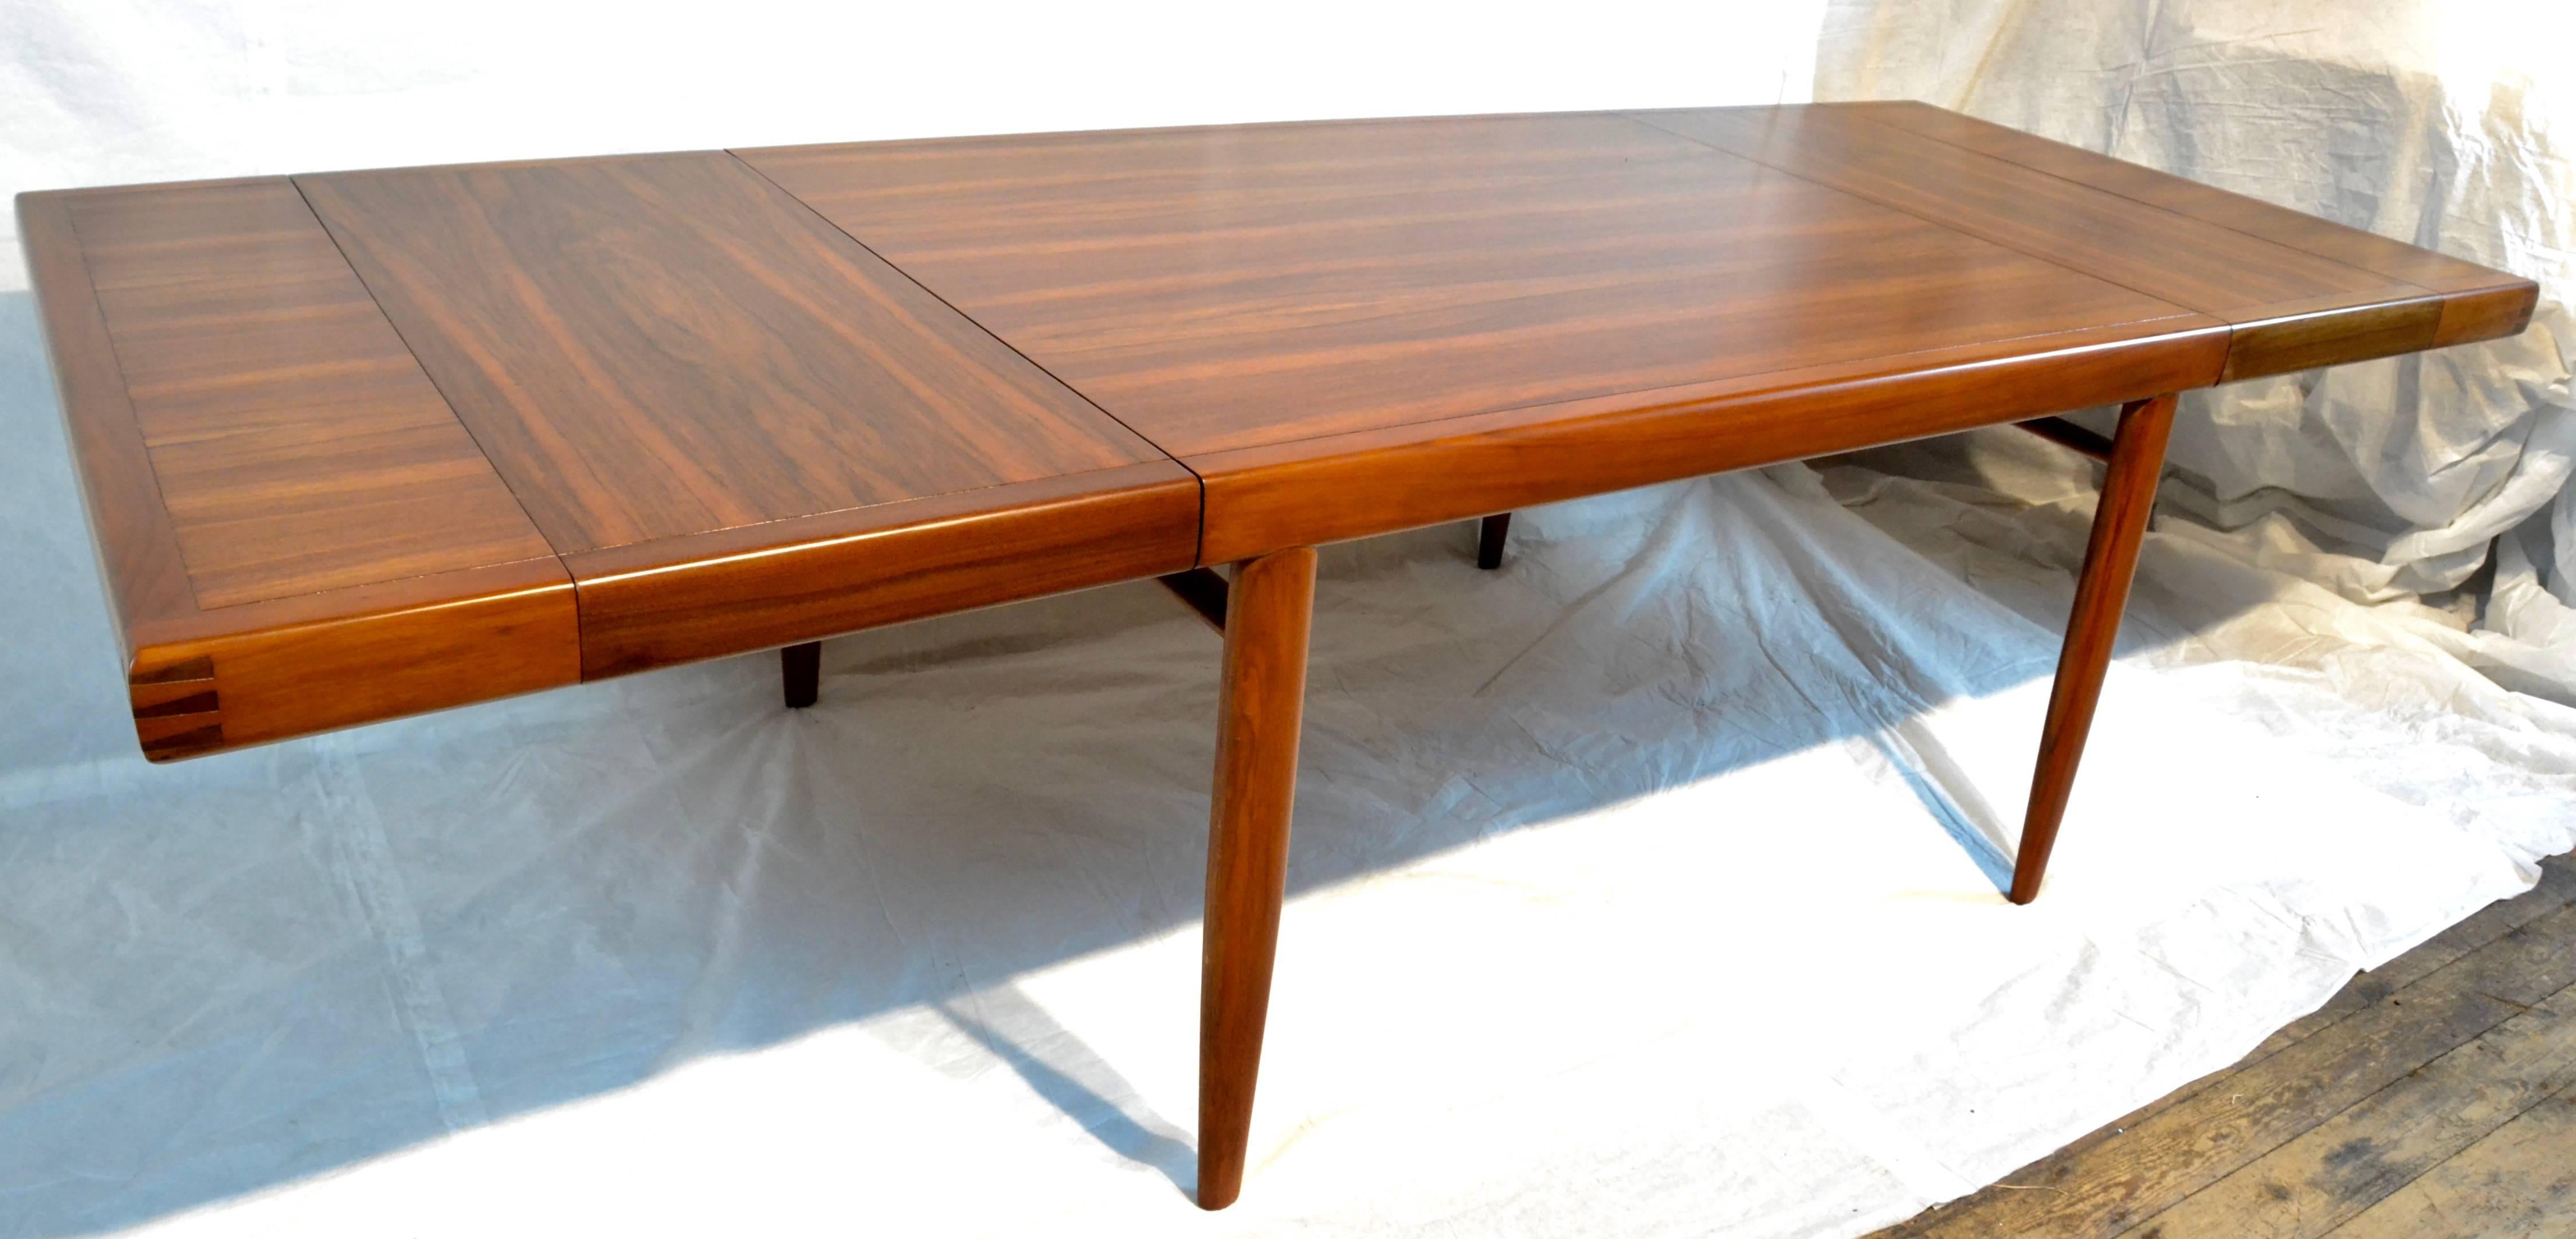 A refractory dining table designed by George Nakashima for Widdicomb. 
The top is East India Laurel framed in American Walnut. 
Nakashima's Origins line of Furniture was available in Walnut, Carpathian Elm, Laurel and Rosewood.  
The table has a